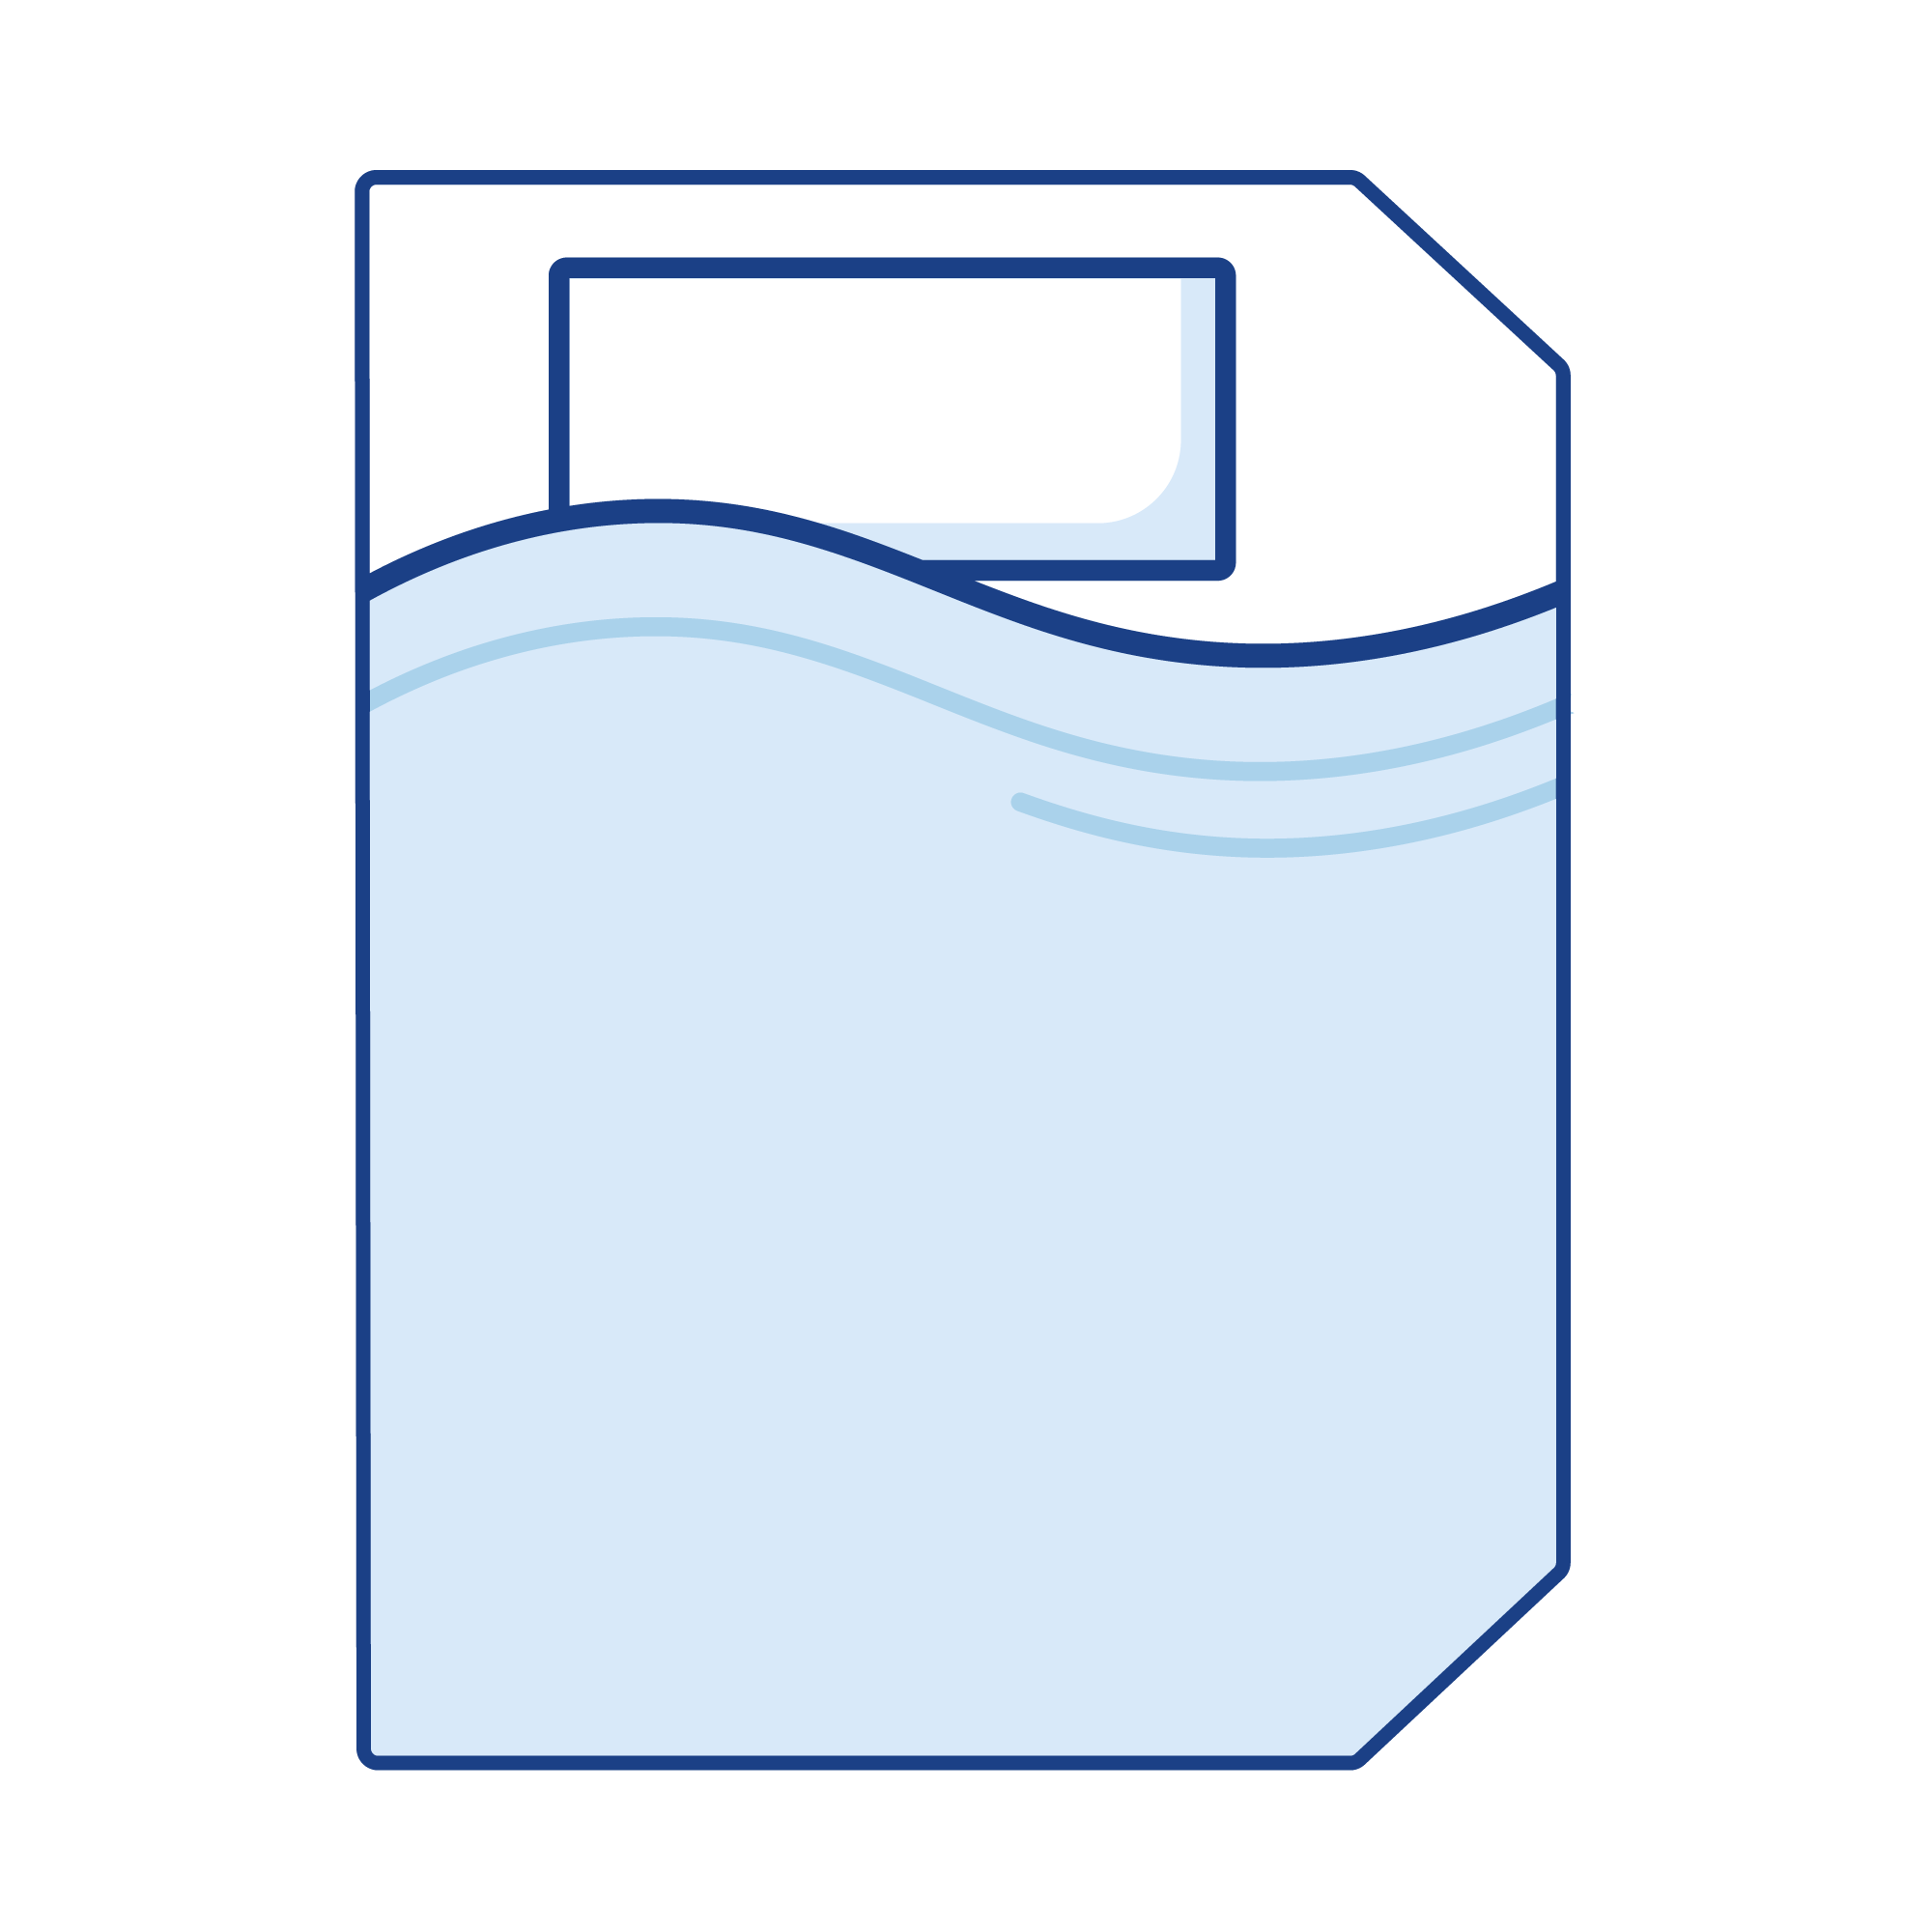 Illustration of a campervan mattress topper with two corners cut off on the same side.